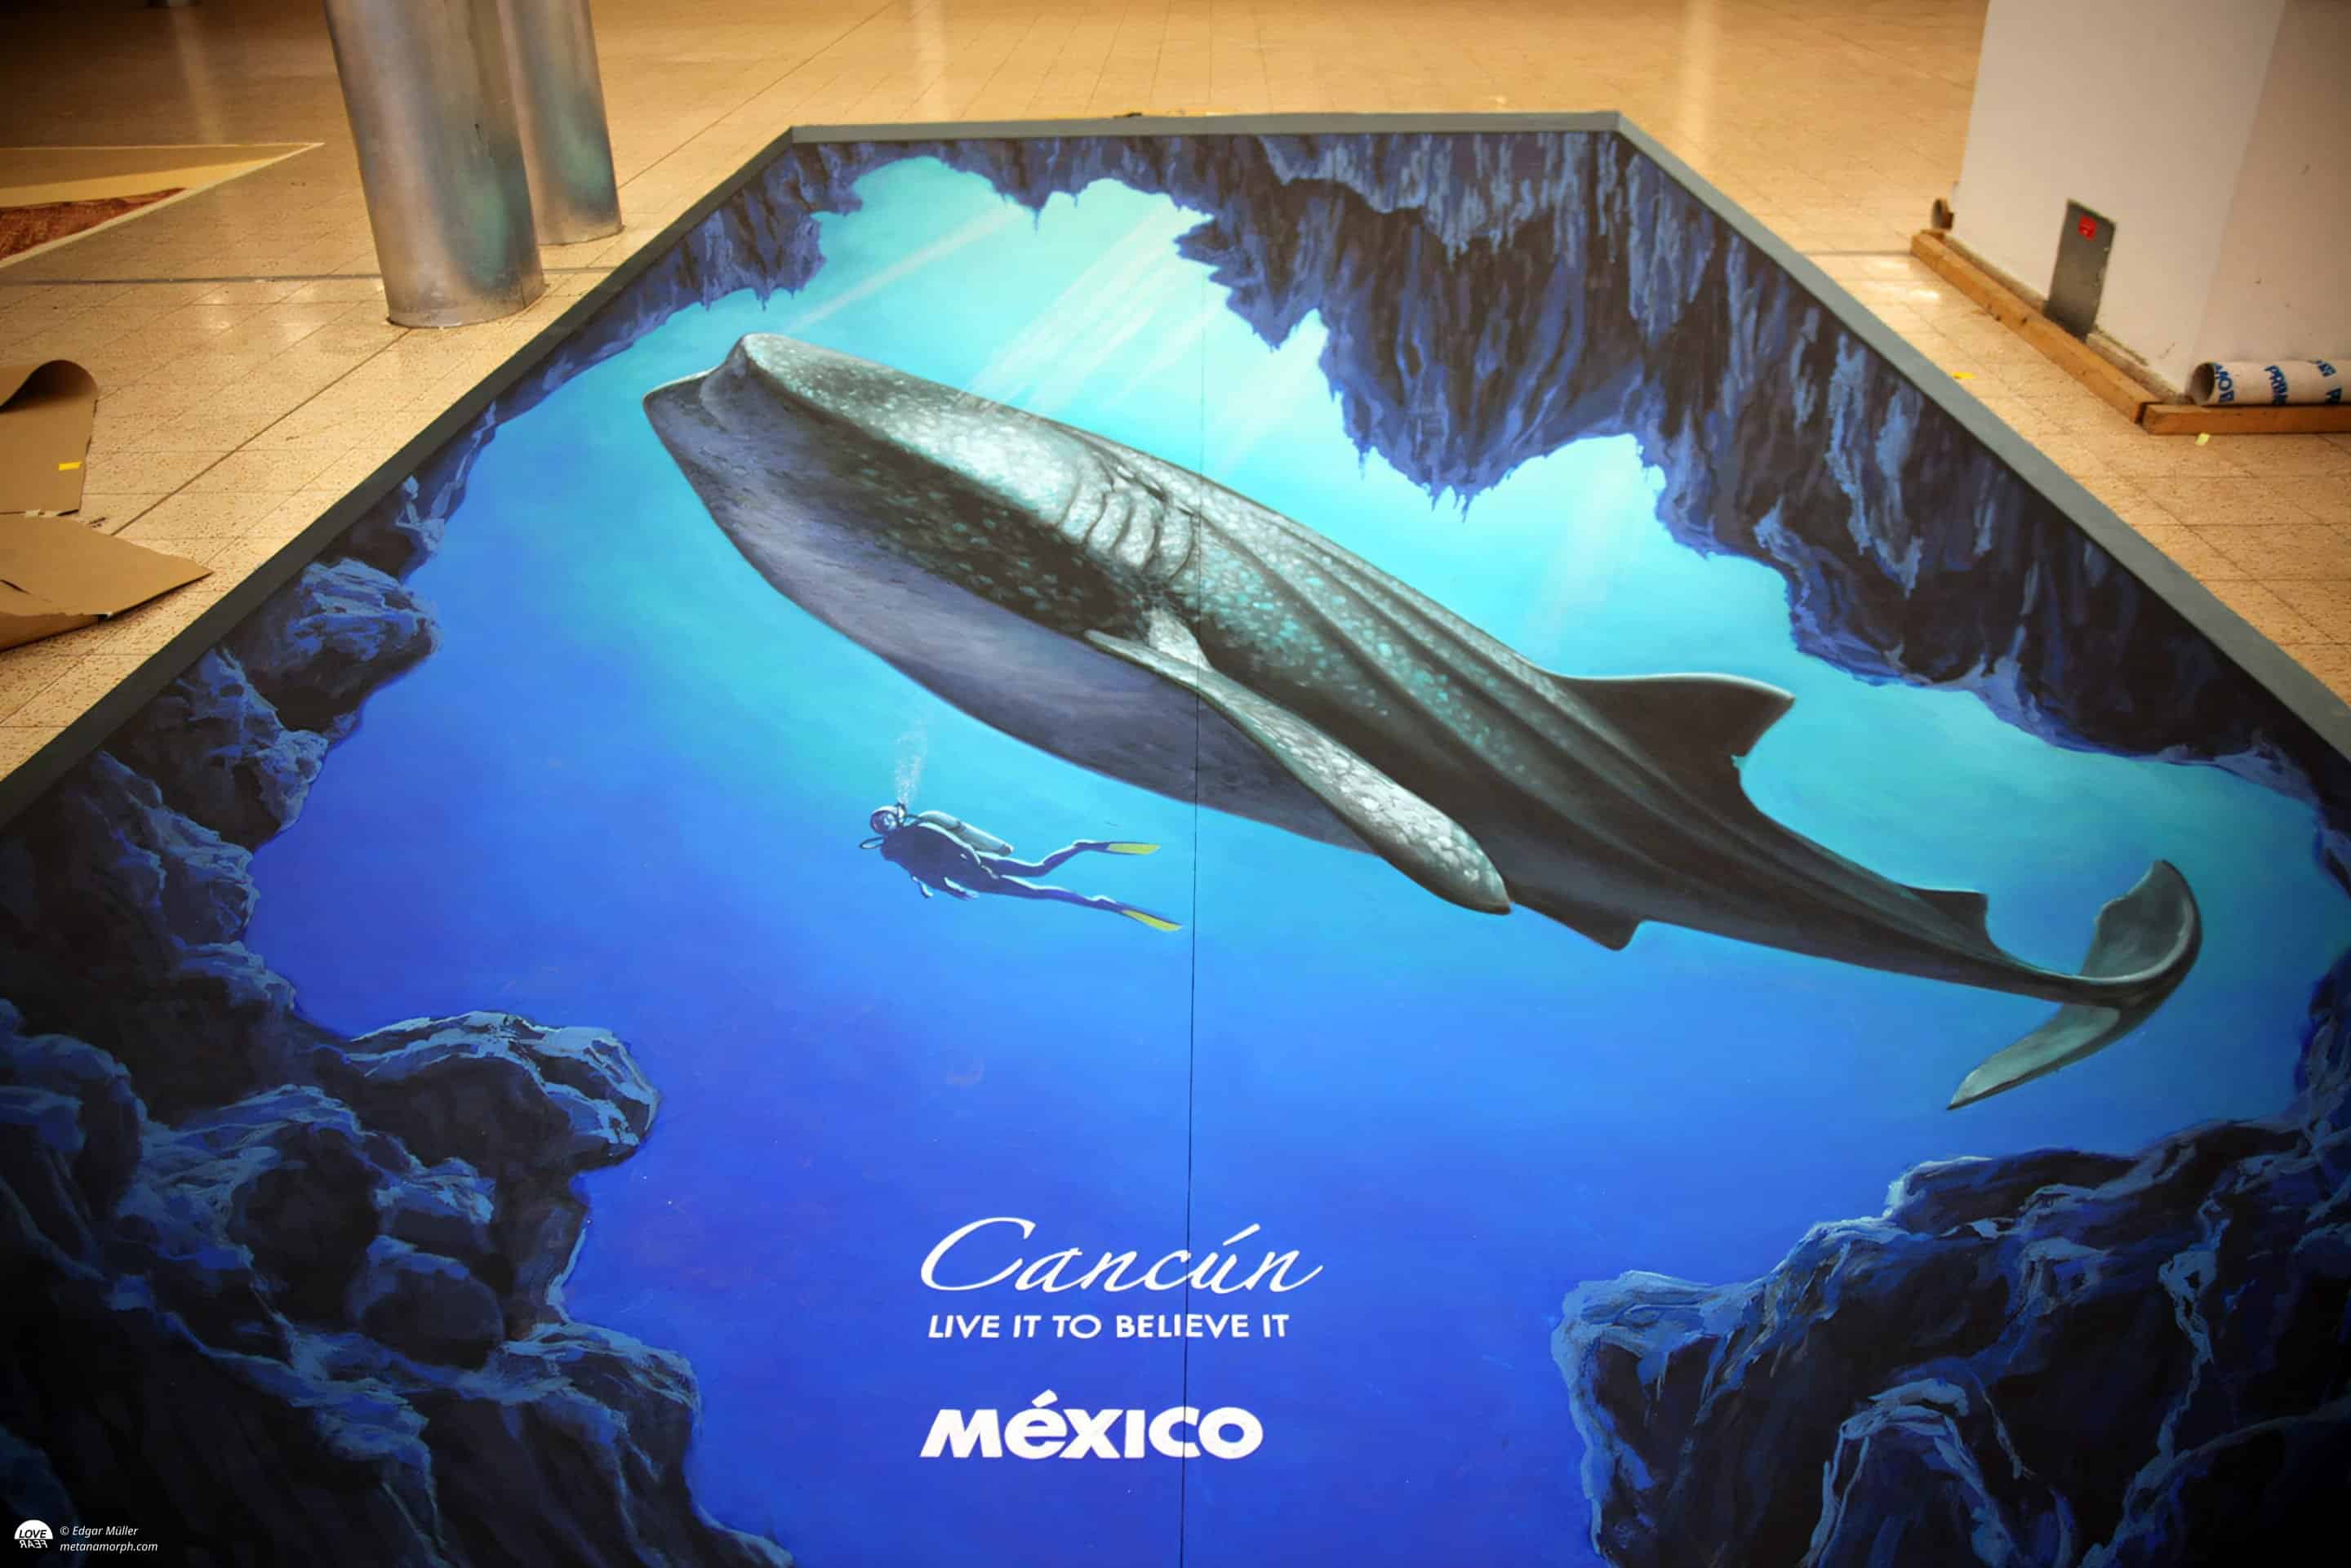 Painted whale in blue lagoon - Tourism Association Mexico